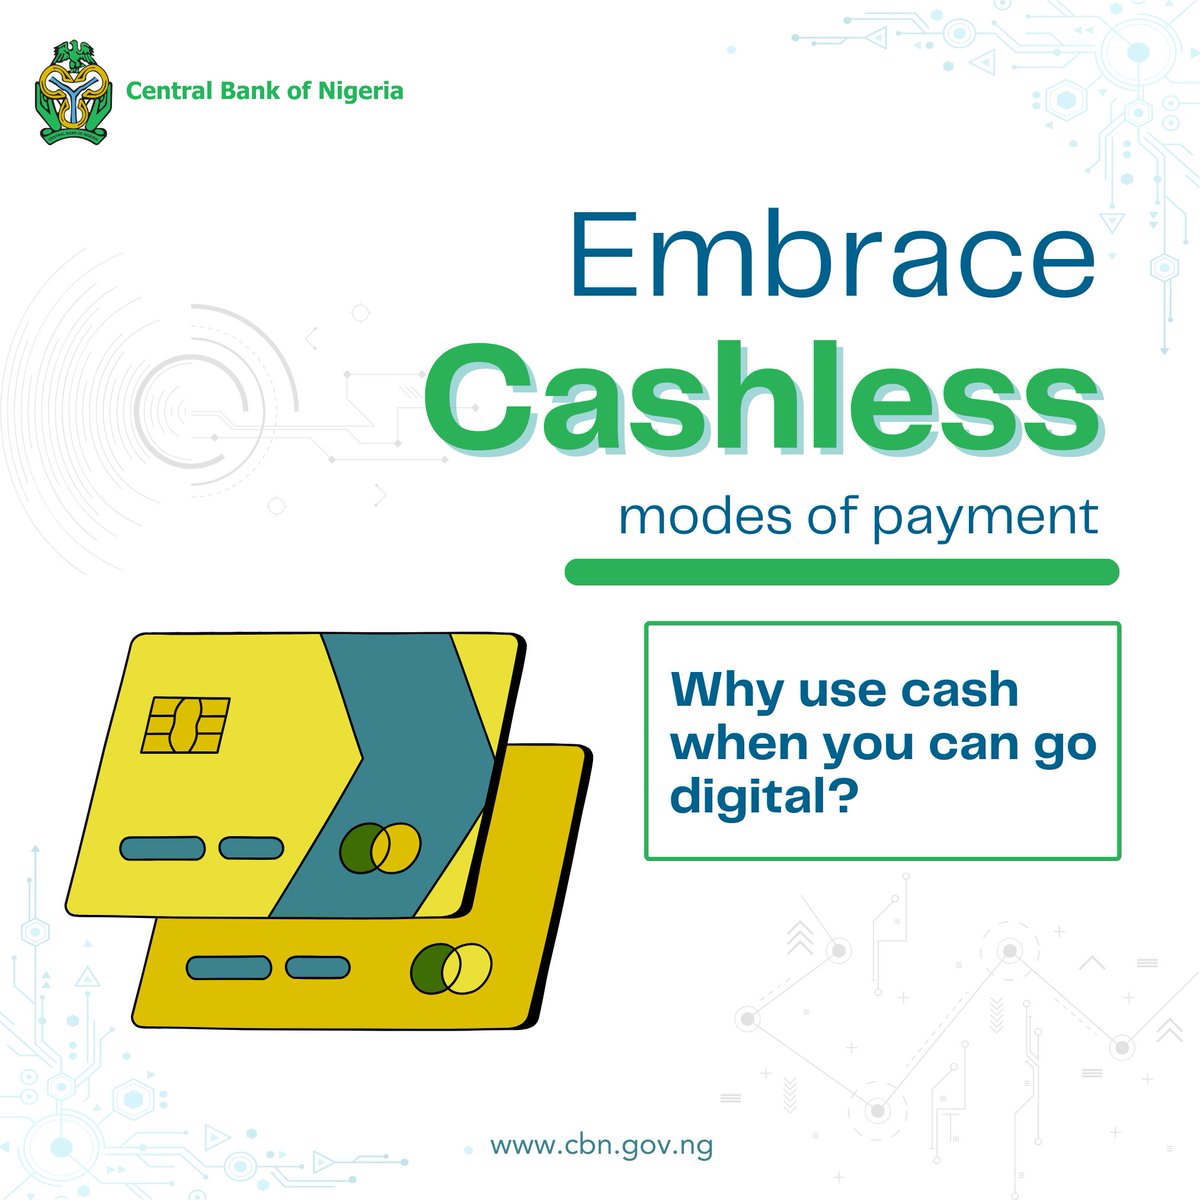 We are committed to ensuring improved digital Banking services. Let's embrace alternative payment channels.